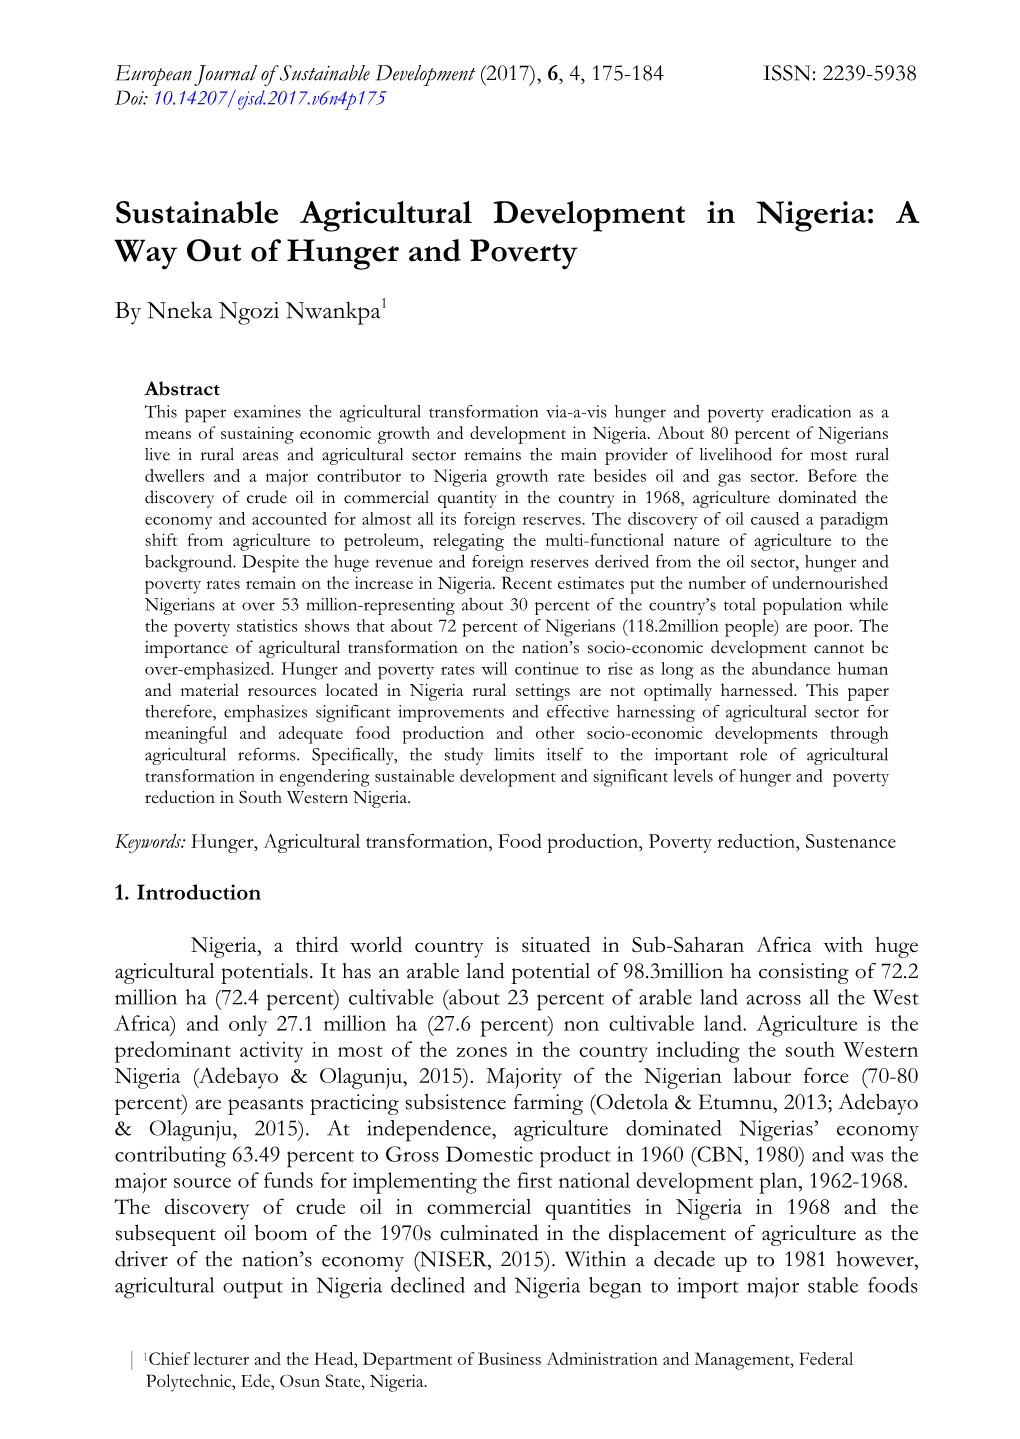 Sustainable Agricultural Development in Nigeria: a Way out of Hunger and Poverty